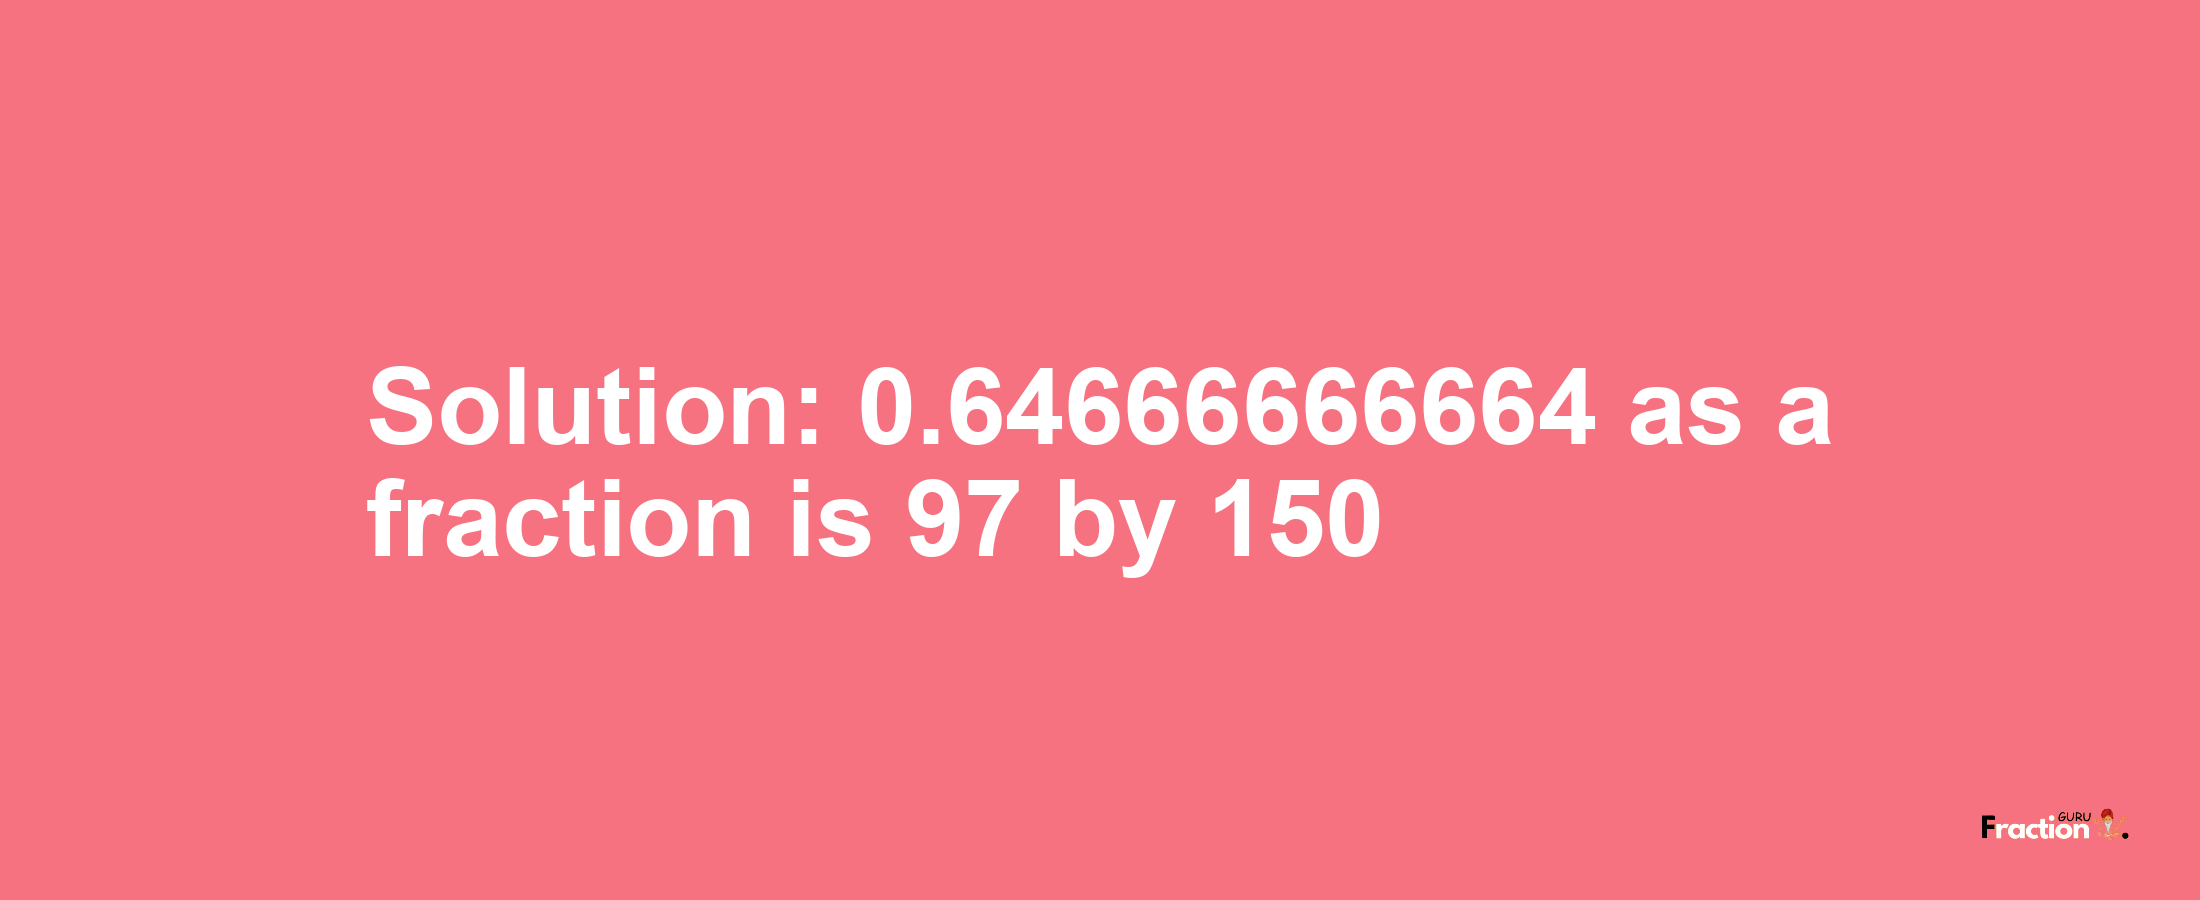 Solution:0.64666666664 as a fraction is 97/150